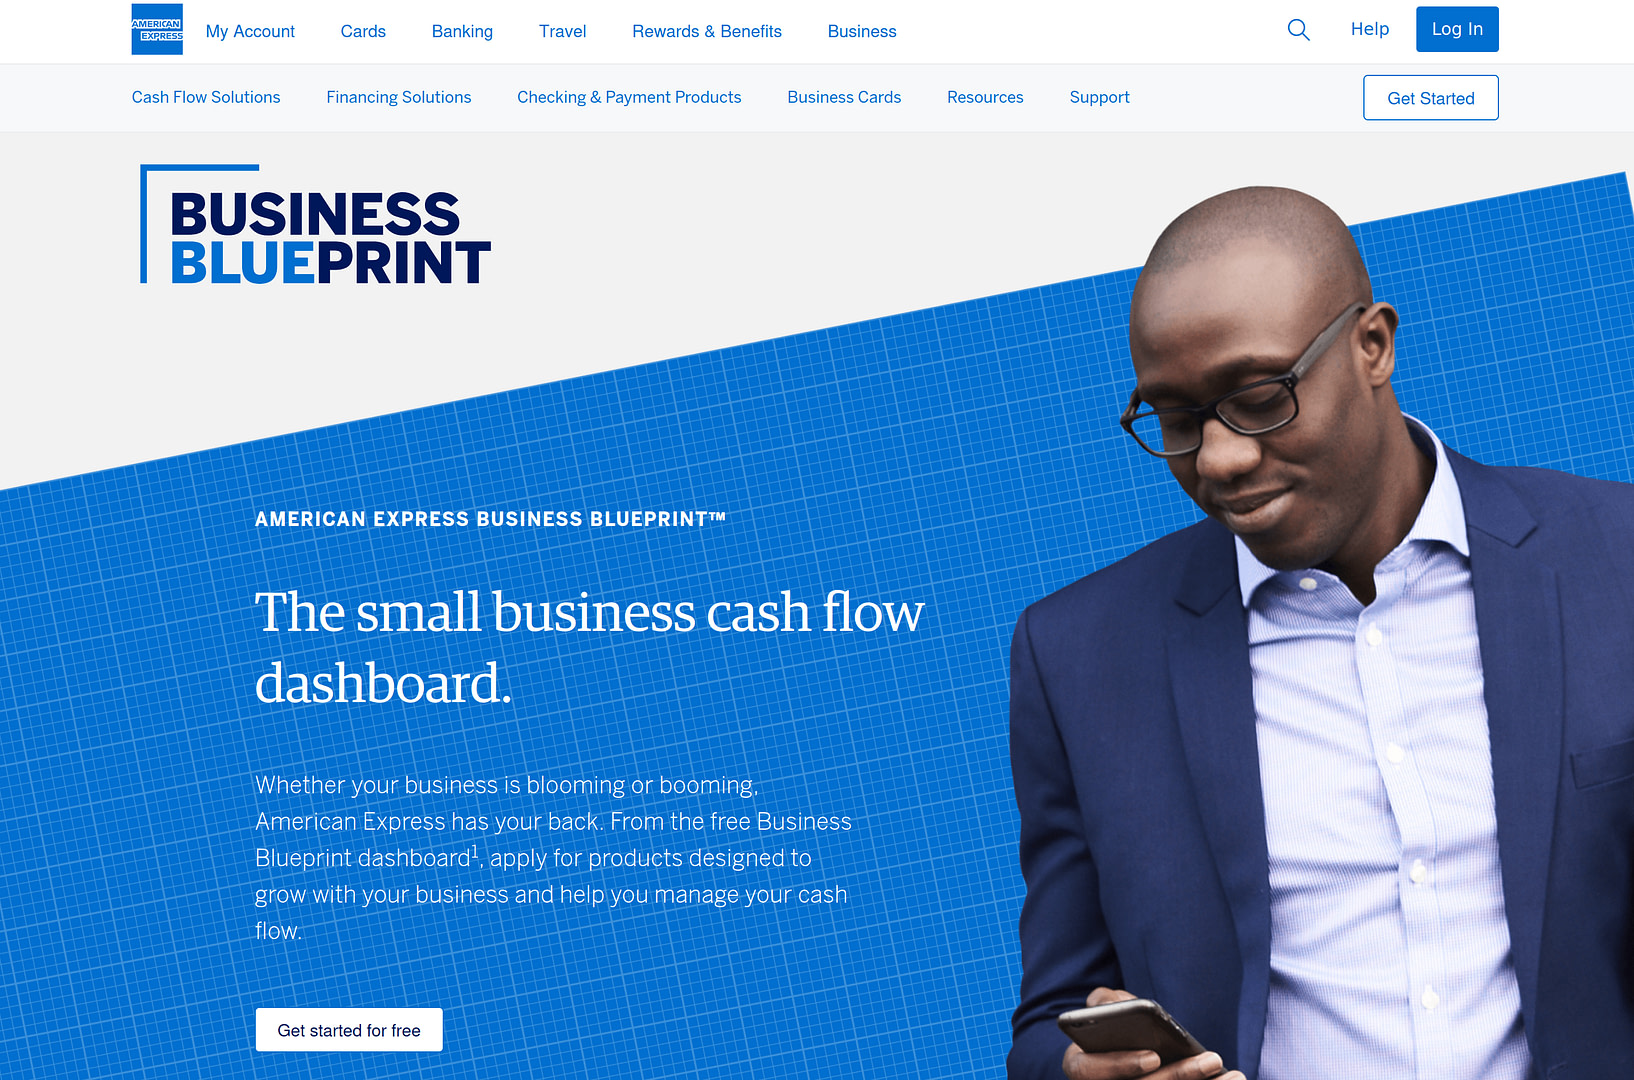 American Express Business Blueprint page